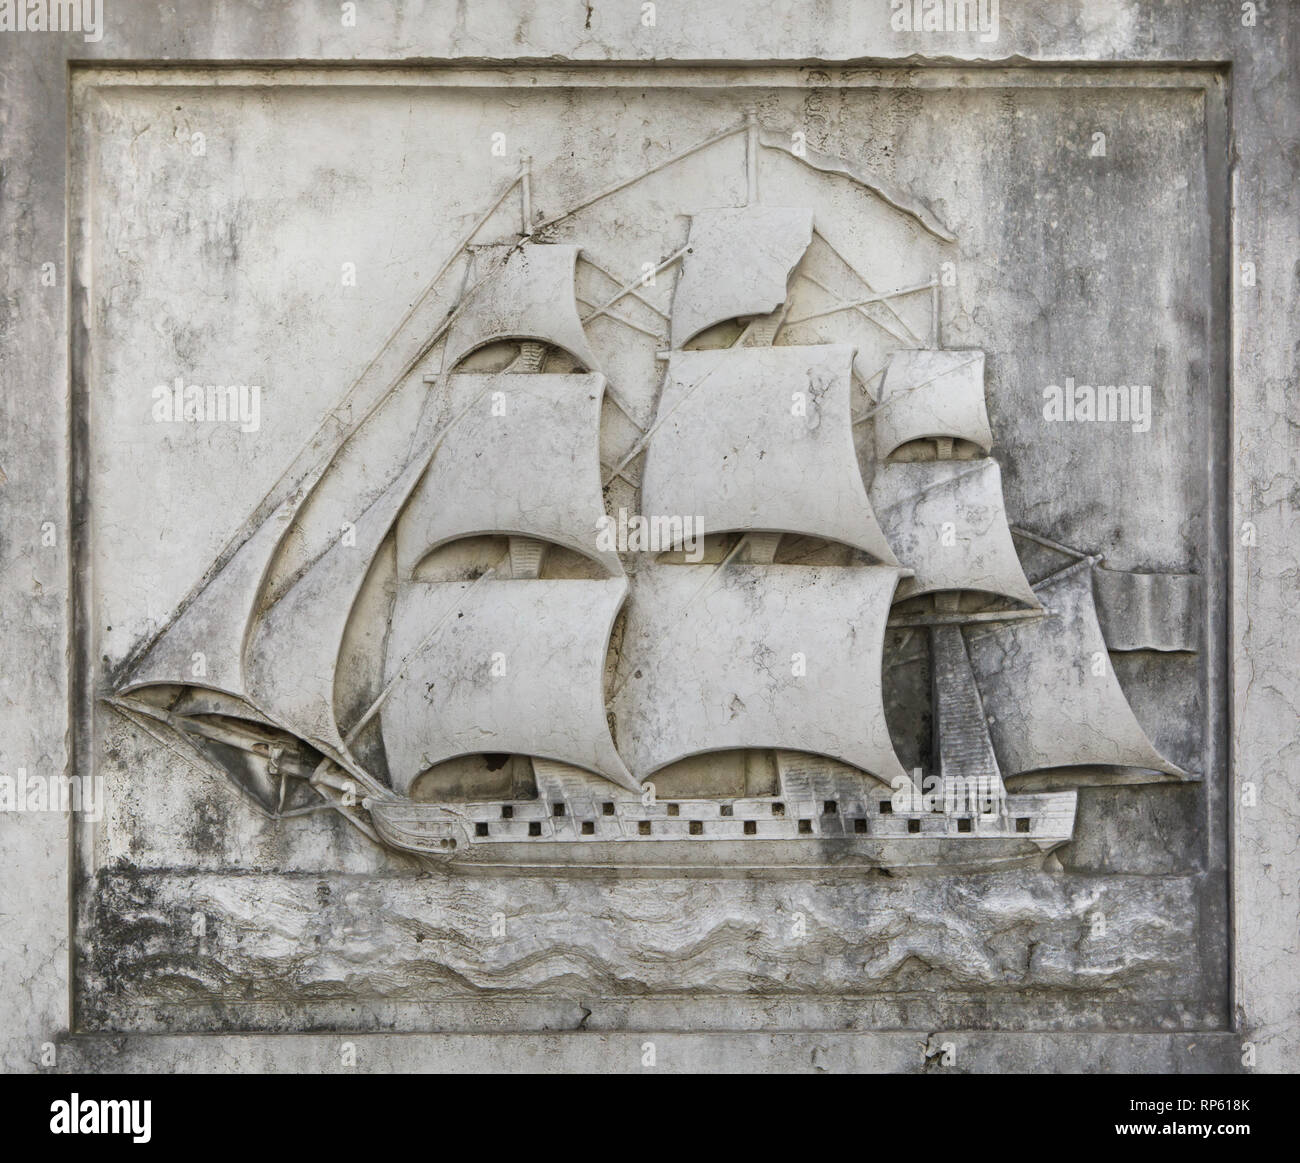 Portuguese sailing ship depicted in the stone plaque dated from the 19th century on display in the Carmo Archaeological Museum (Museu Arqueológico do Carmo) in the former Carmo Convent (Convento do Carmo) in Lisbon, Portugal. Stock Photo